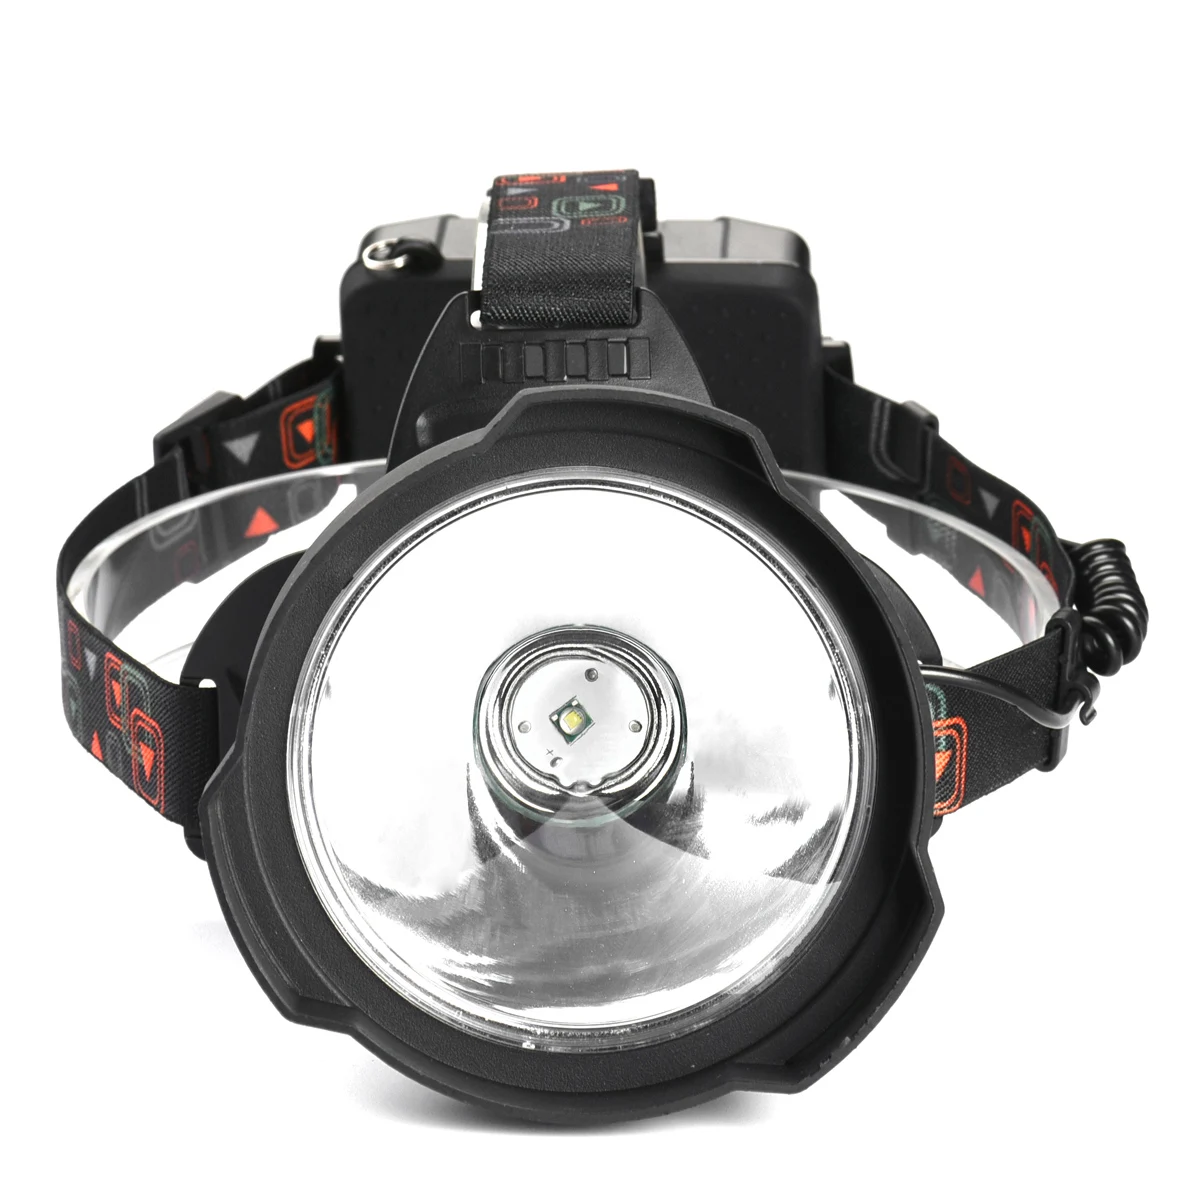 8X 18650 Batteries+Charger UK Super Bright 500000LM LED Headlamp 3 Head Torch 